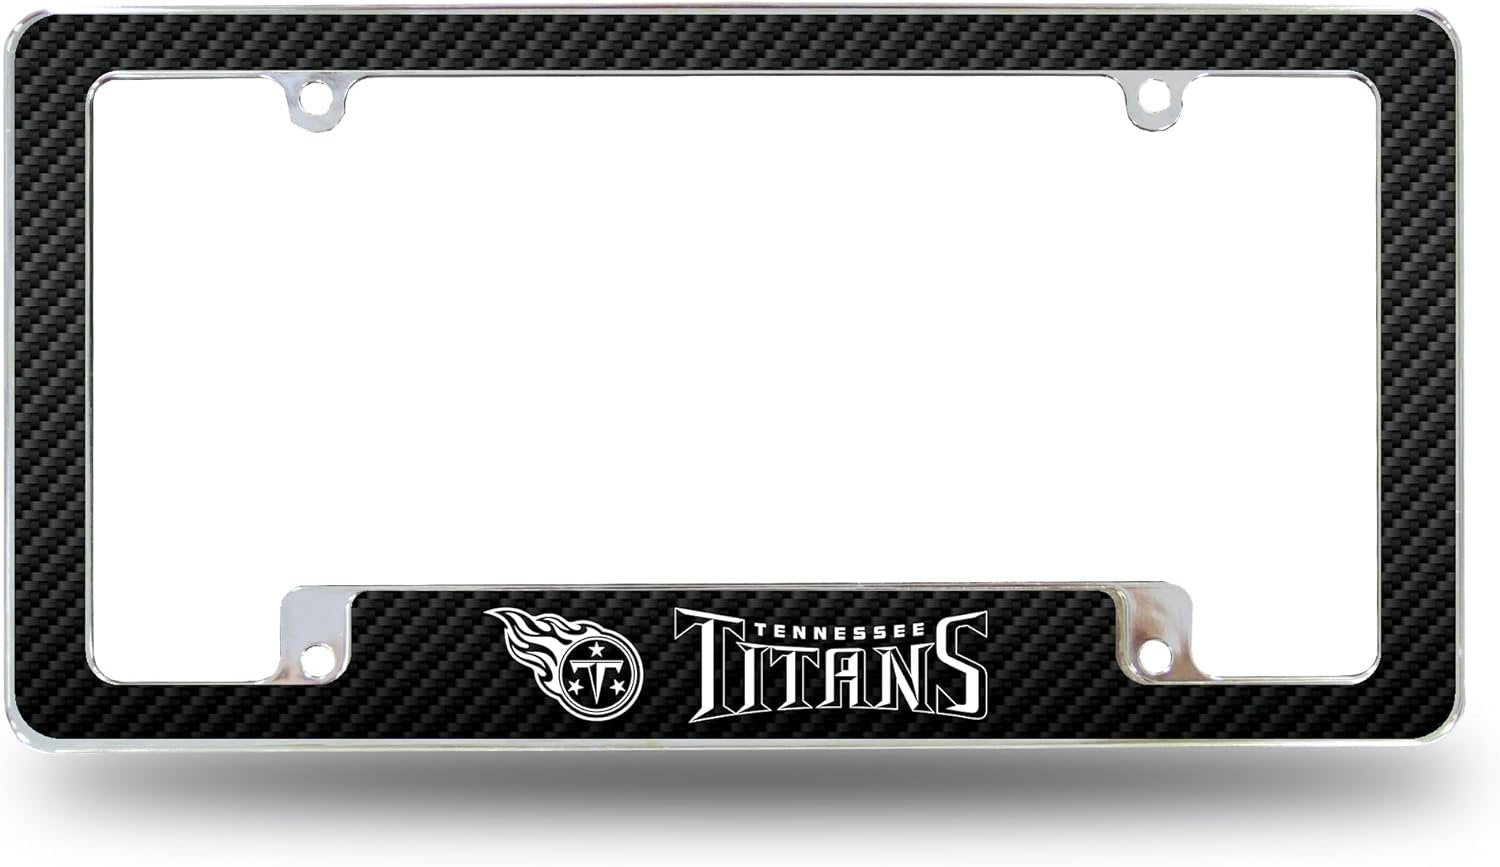 Tennessee Titans Metal License Plate Frame Chrome Tag Cover, Carbon Fiber Design, 6x12 Inch